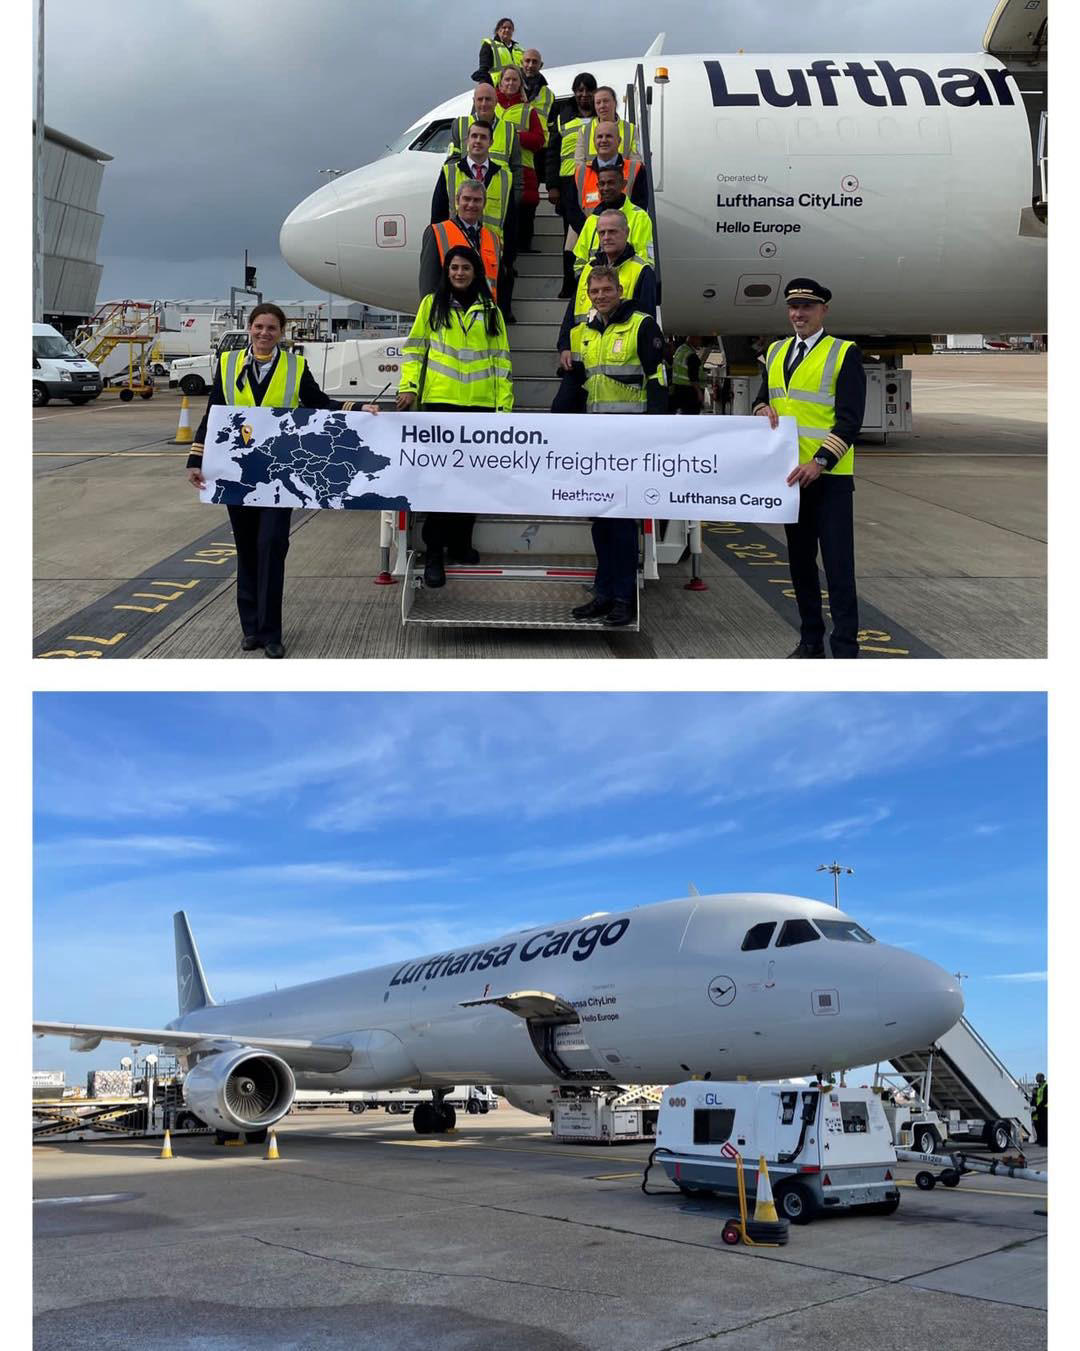 🇬🇧🇬🇧🇬🇧 #HelloLondon - Yesterday our #A321F had a warm welcome at Heathrow Airport in #London